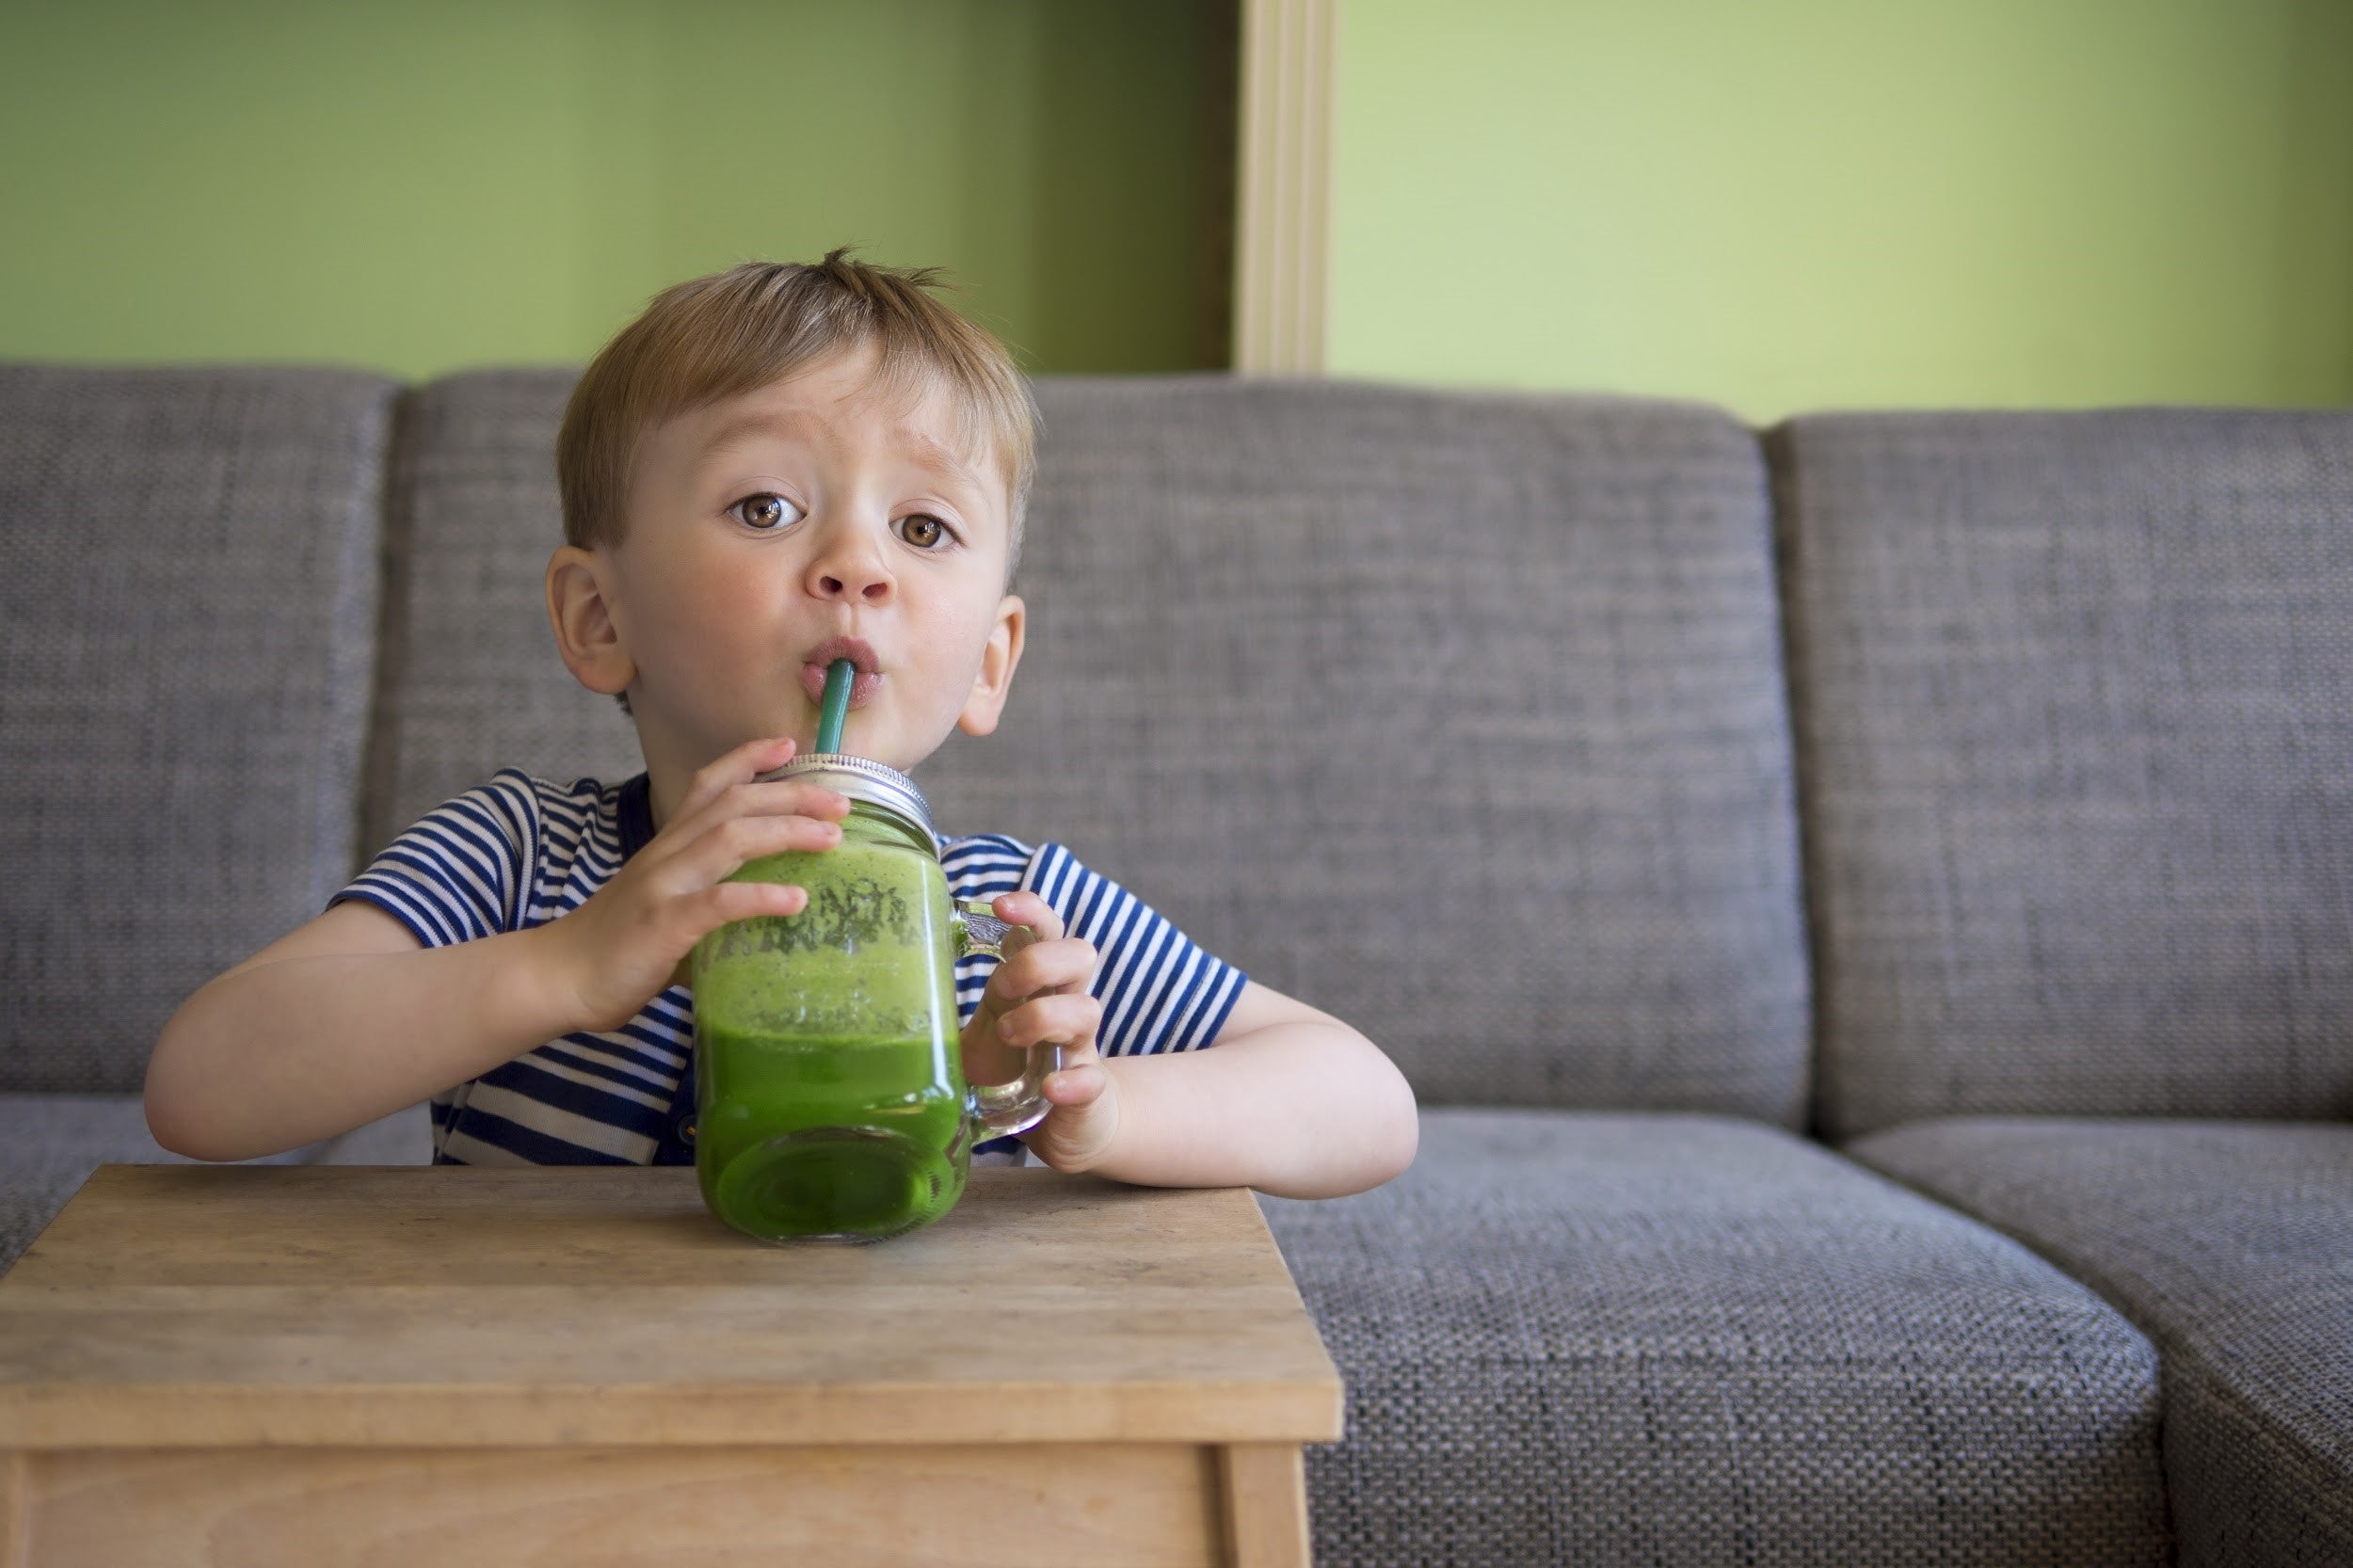 best foods for sick kids by illness - spinach/banana smoothie and leafy greens for aches and pain